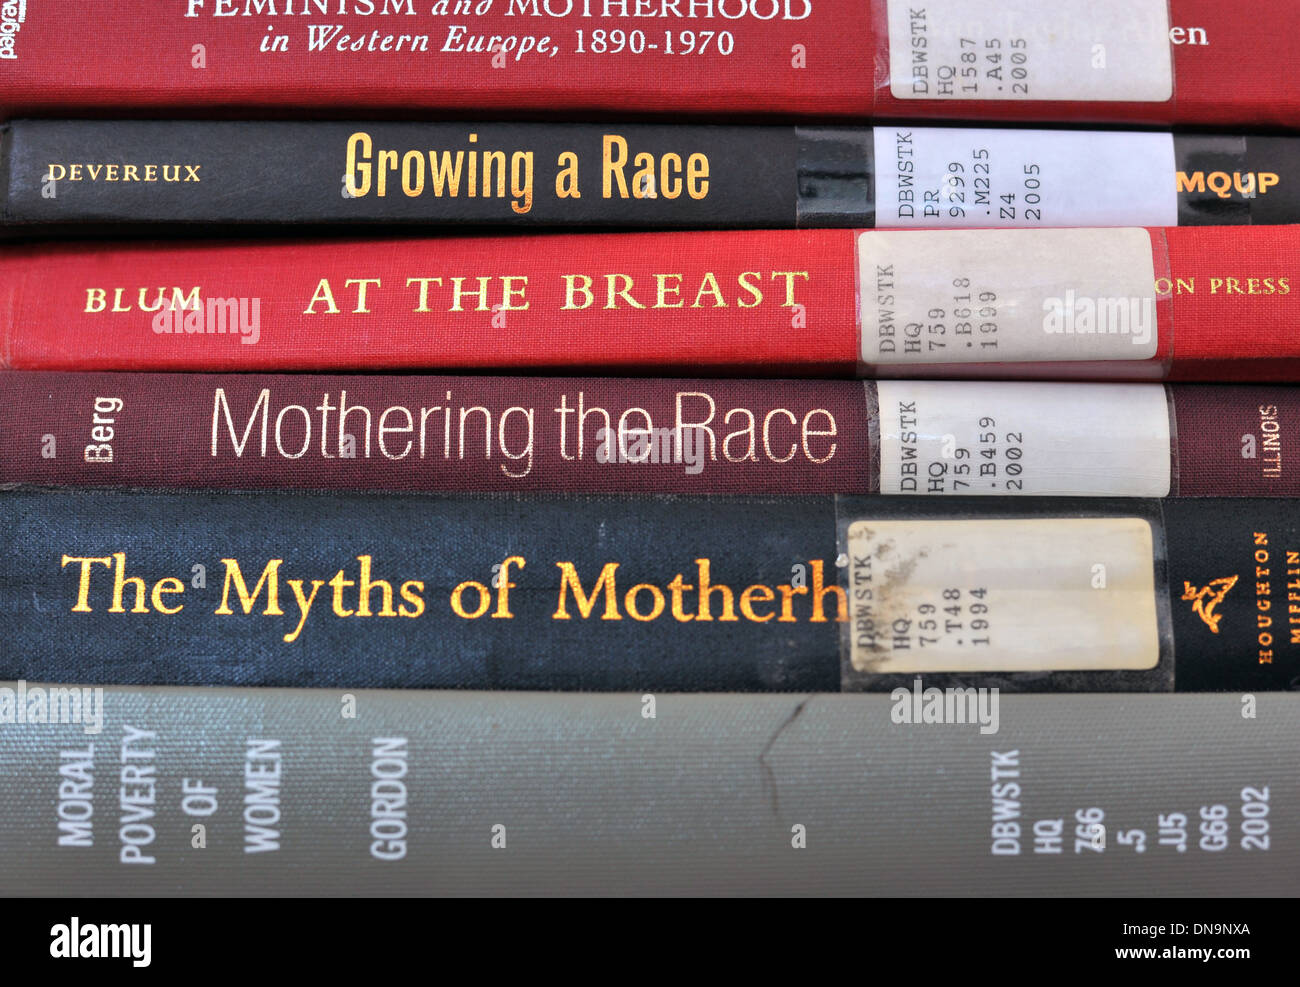 A stack of academic books on mothering and race. Stock Photo